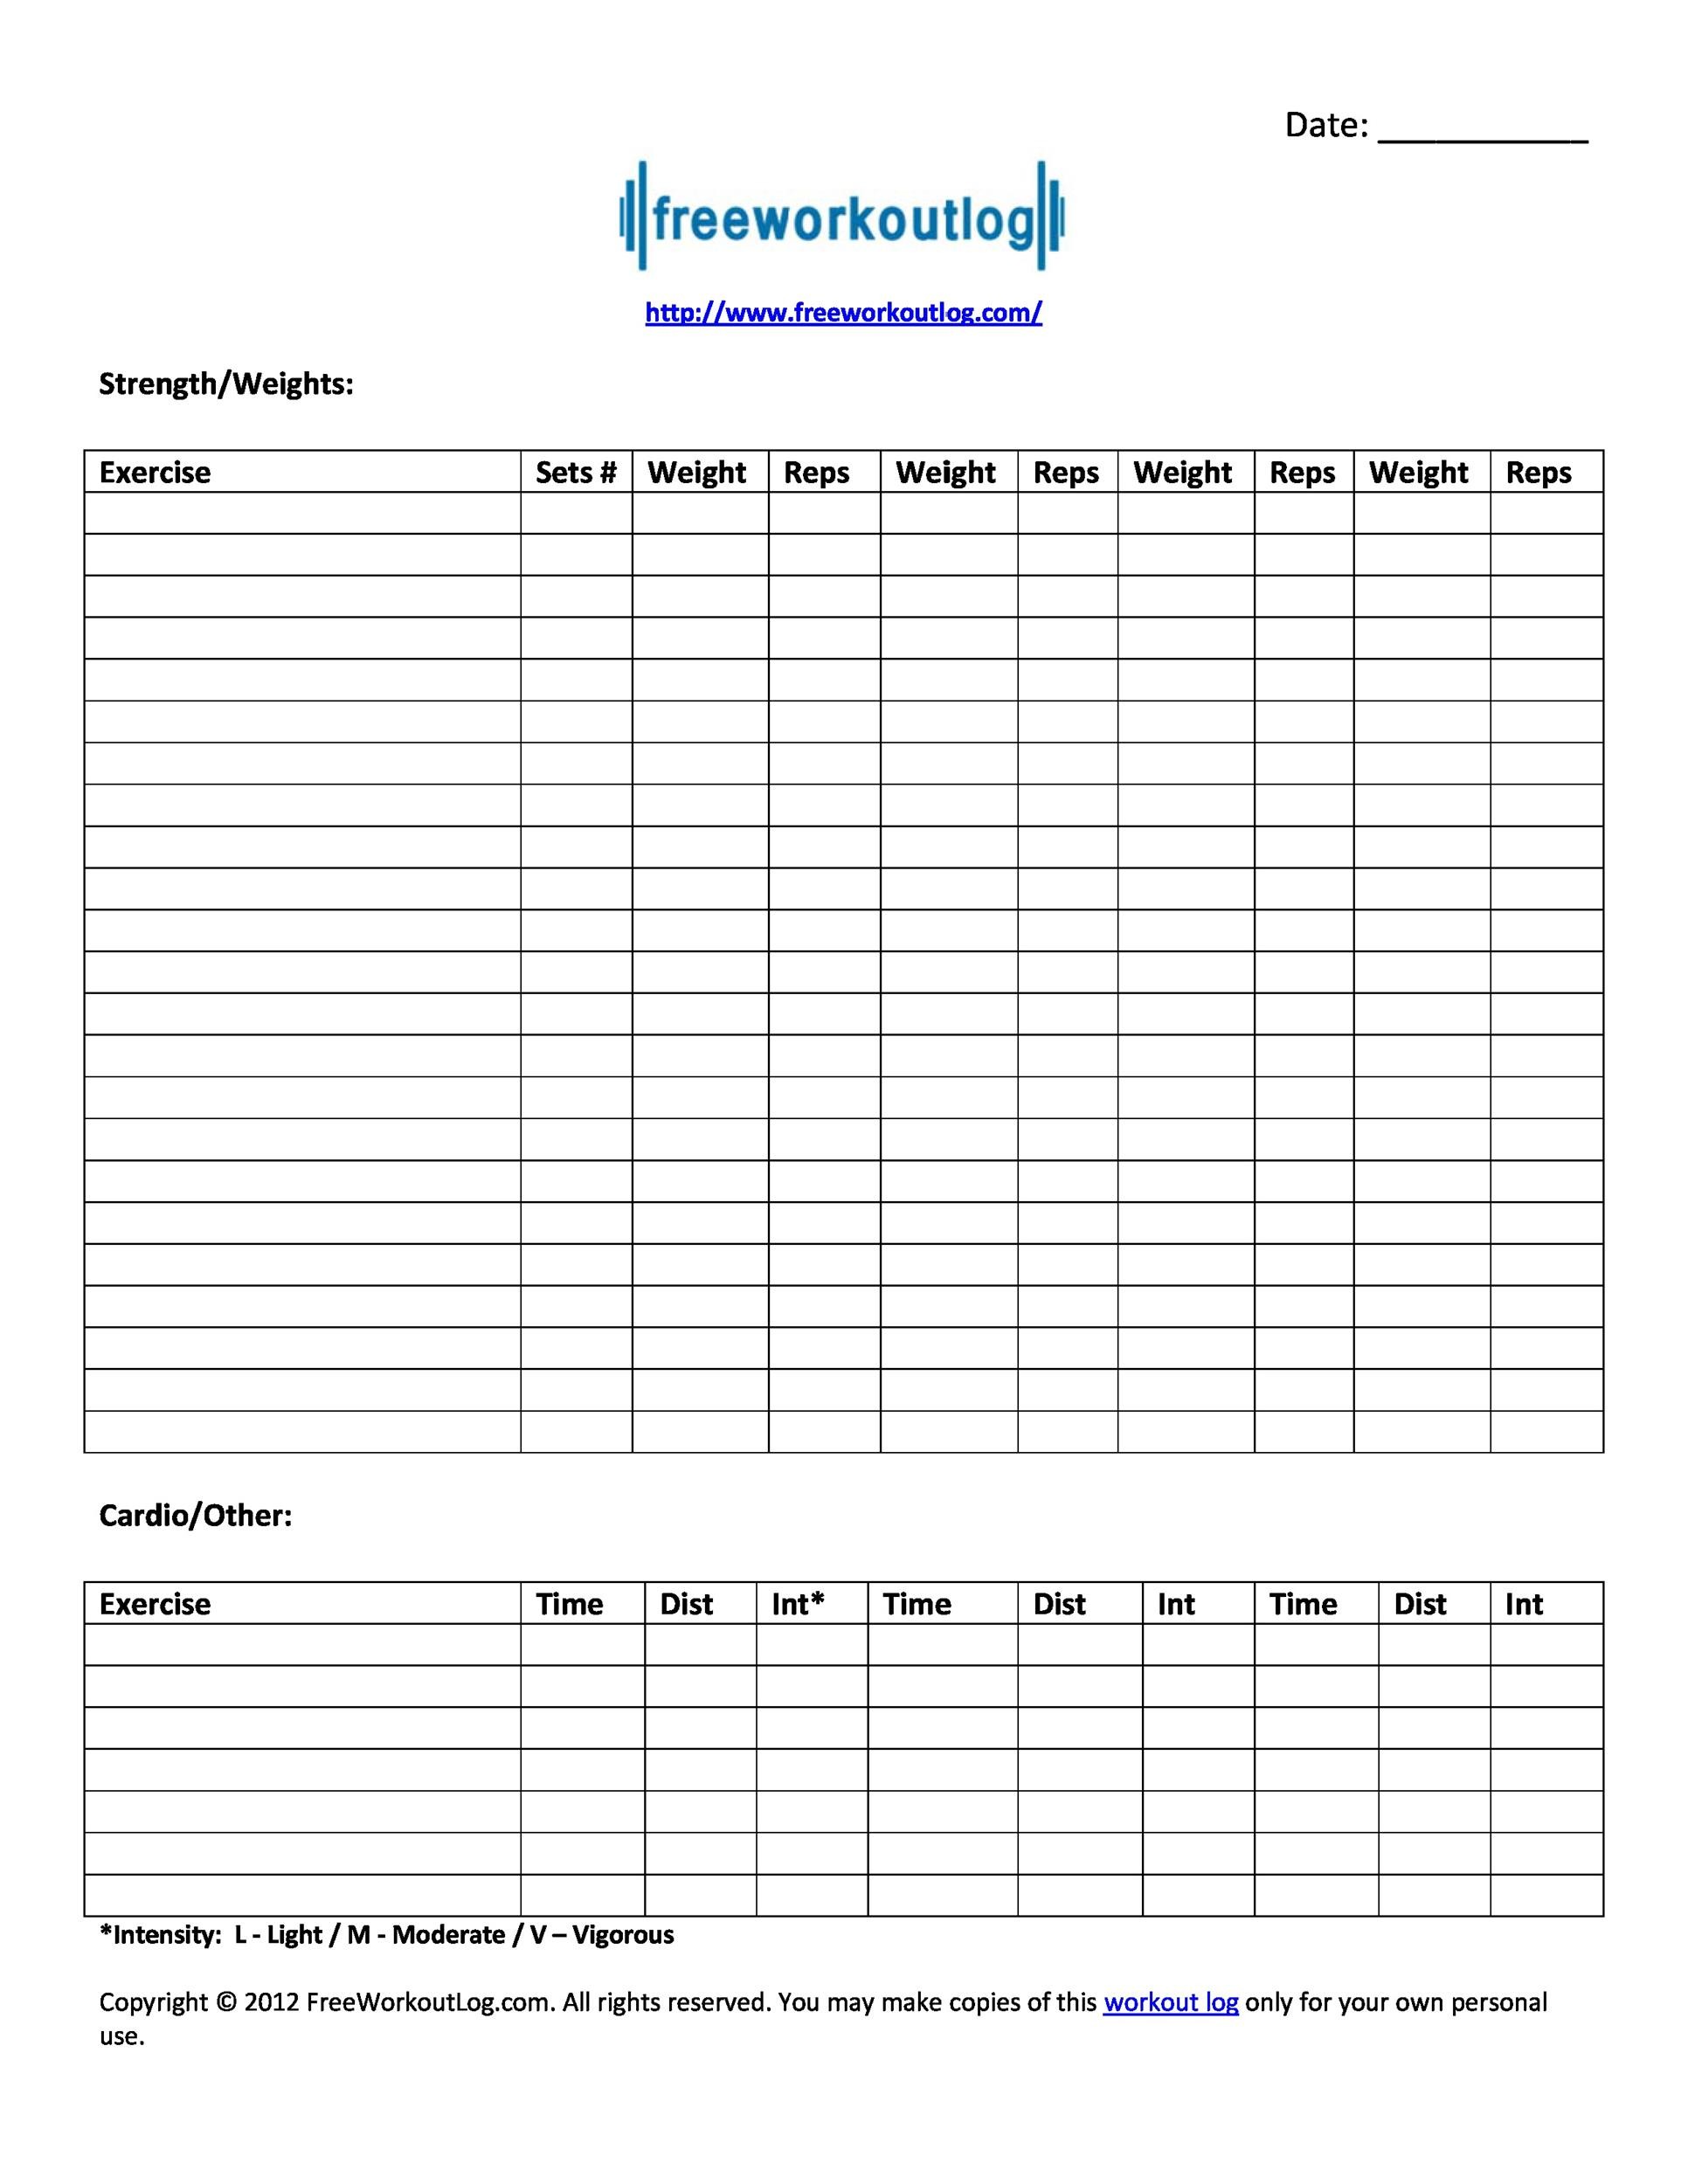 create-your-own-workout-plan-template-workoutwalls